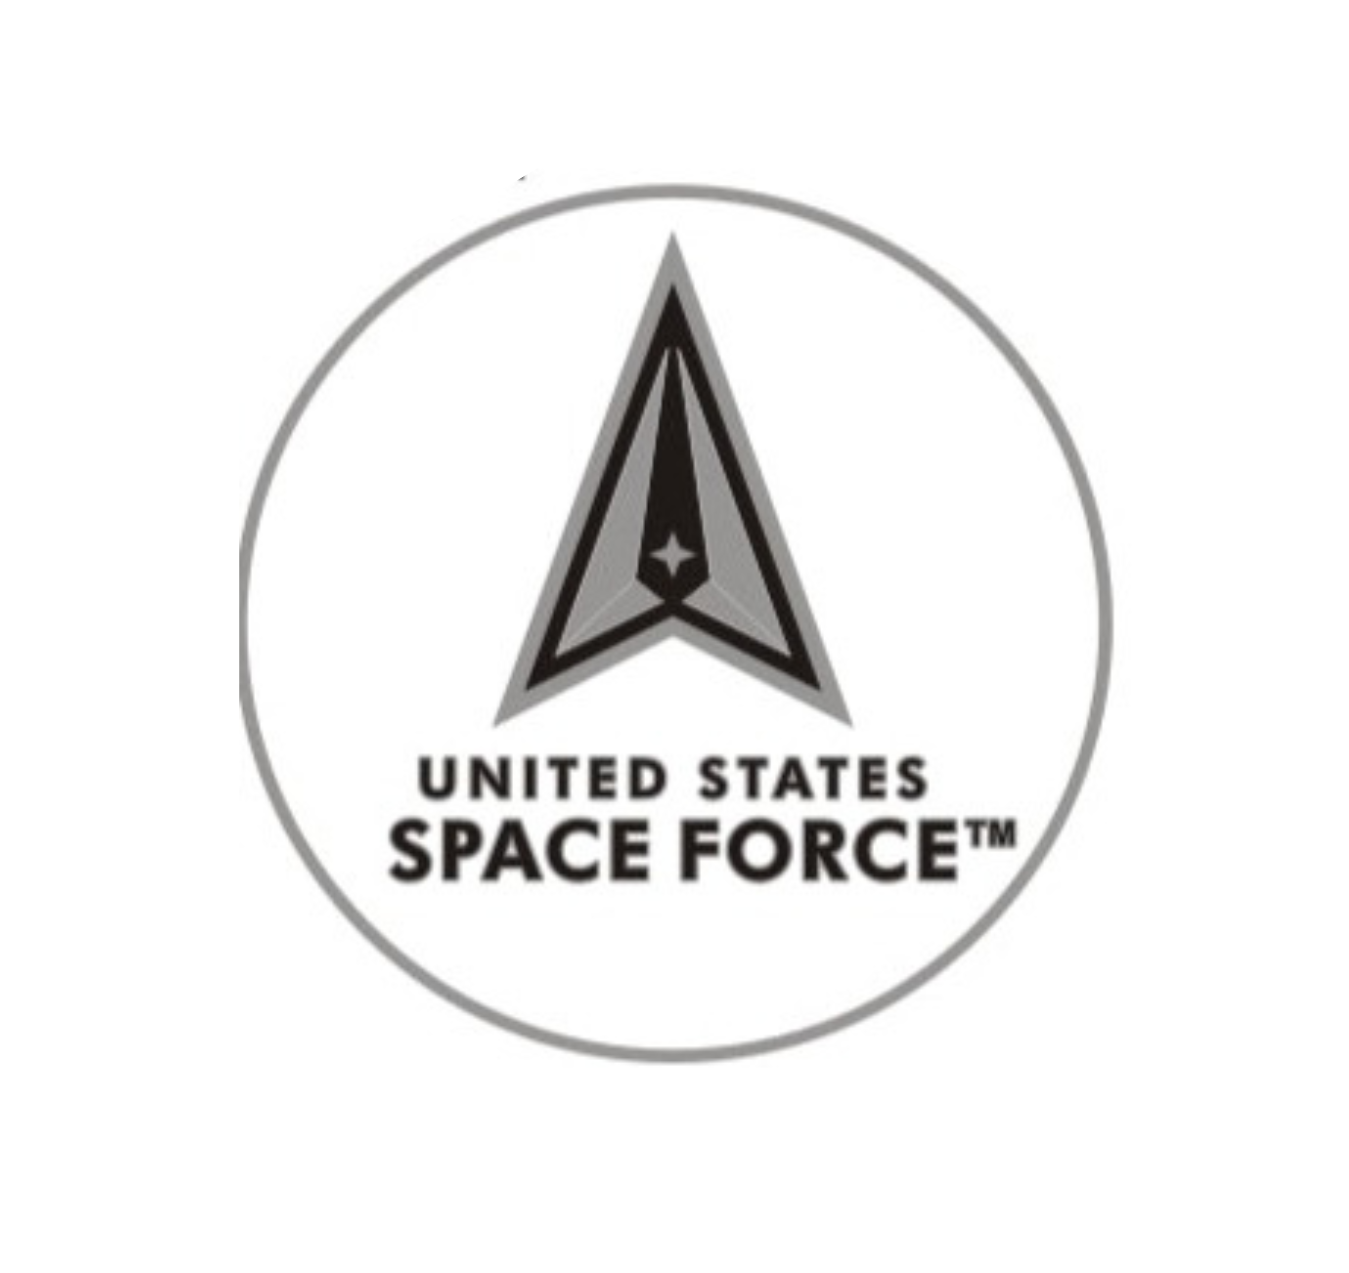 U.S. Space Force Round Lapel Pin